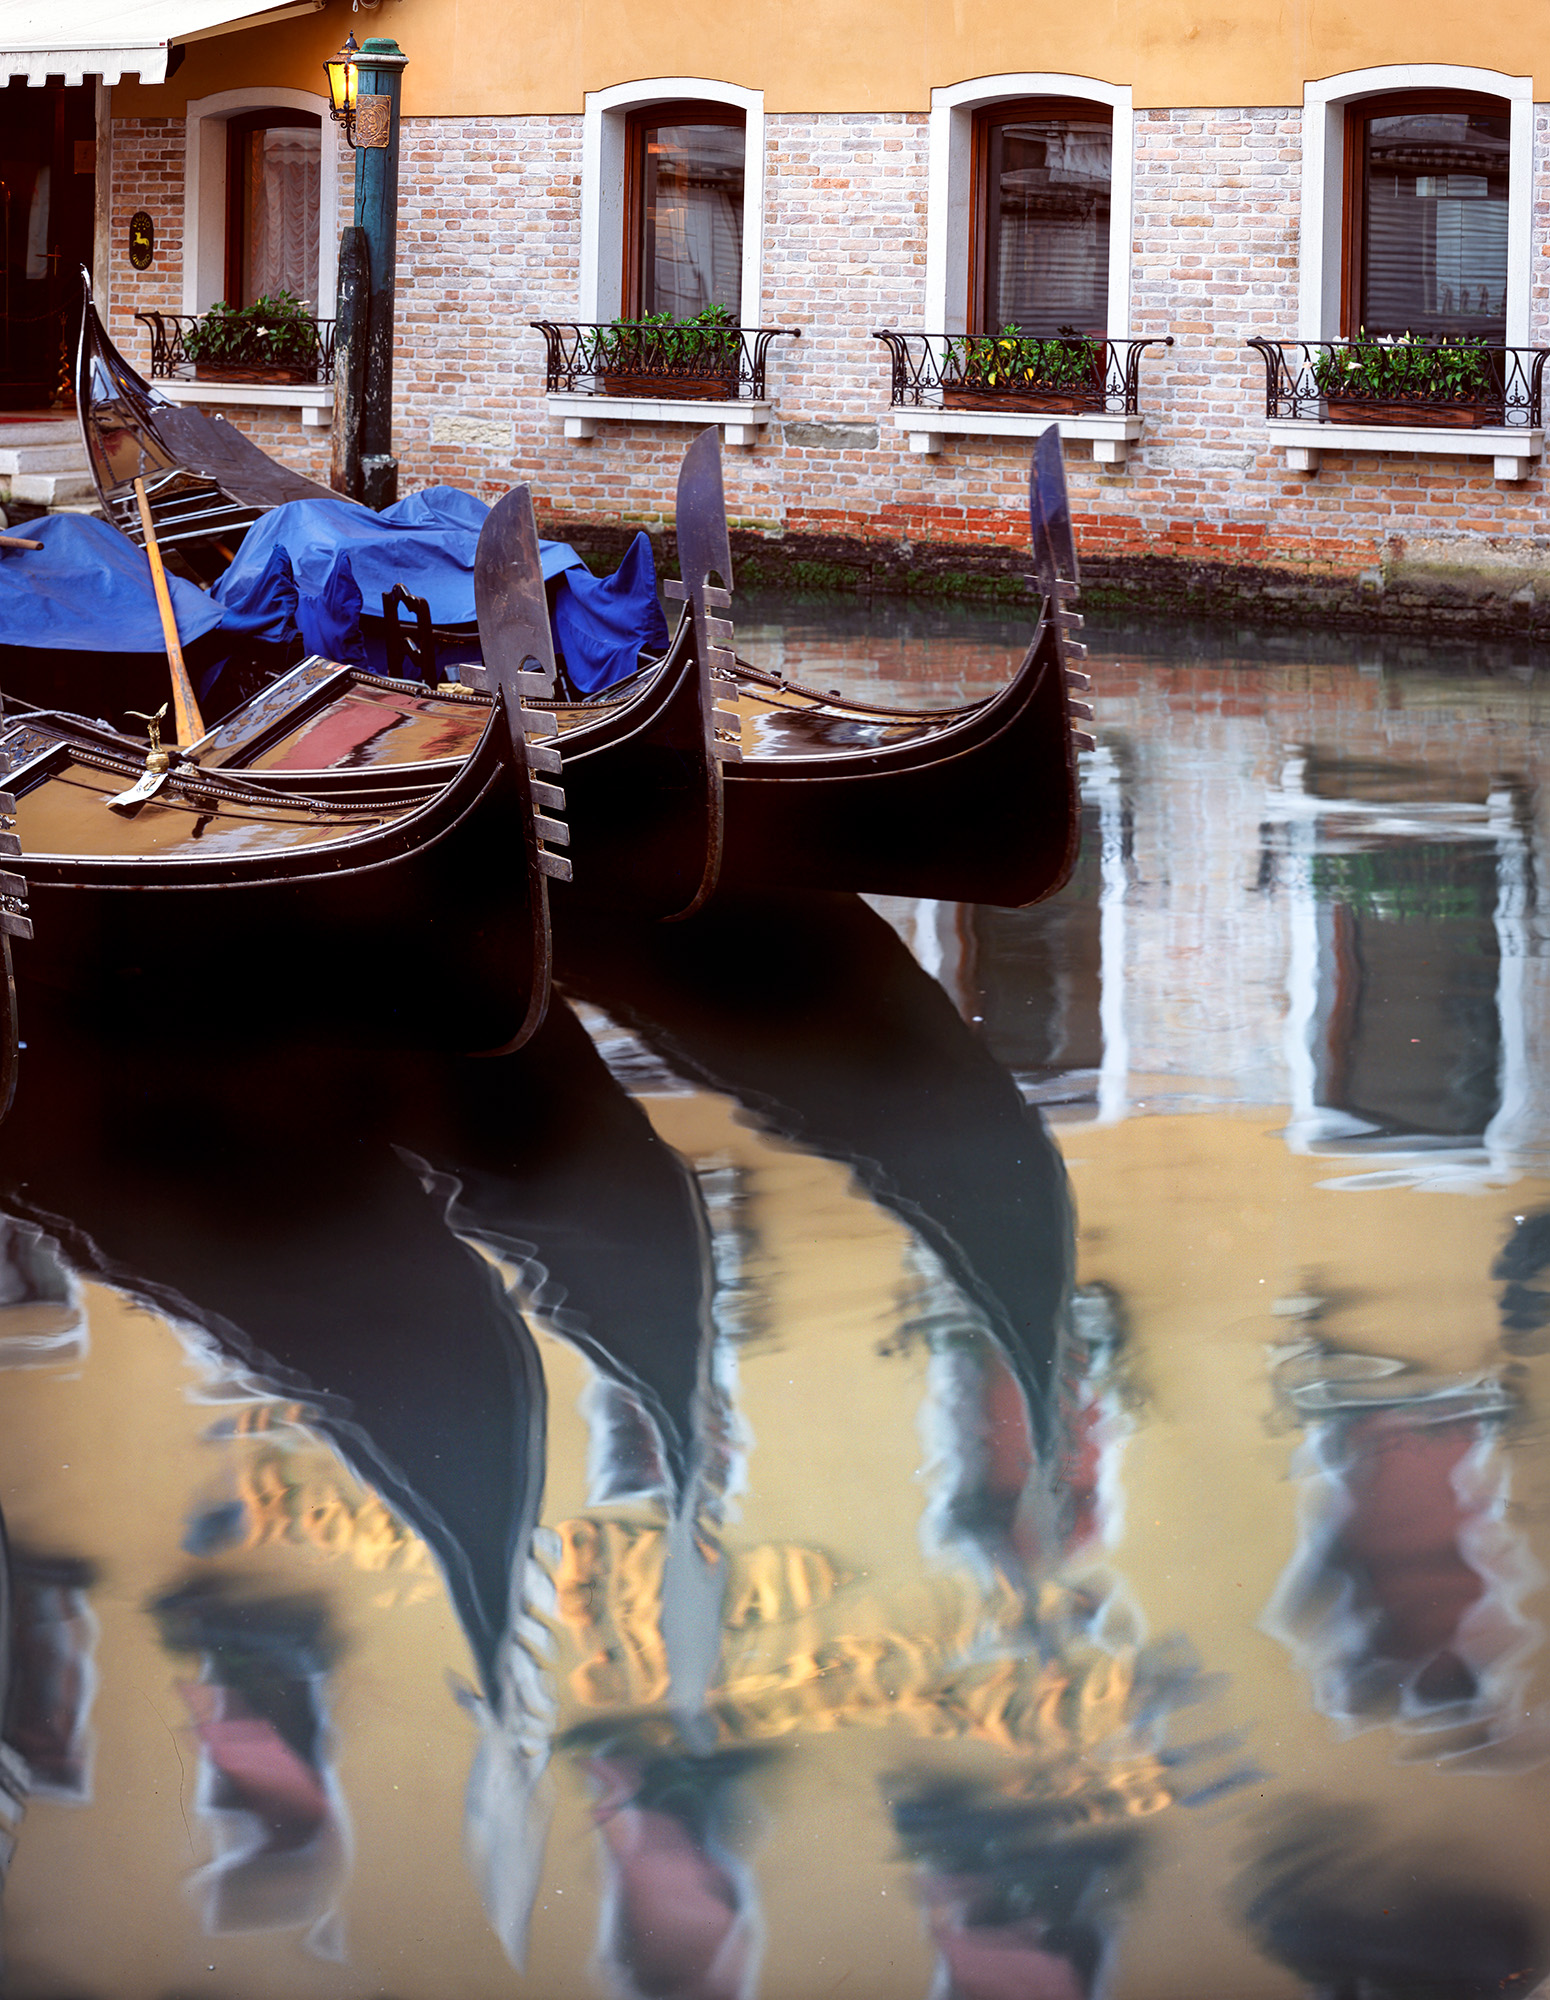 This shot is from my second trip to Venice. The first time I found this place but due to a variety of screwups I never got the...